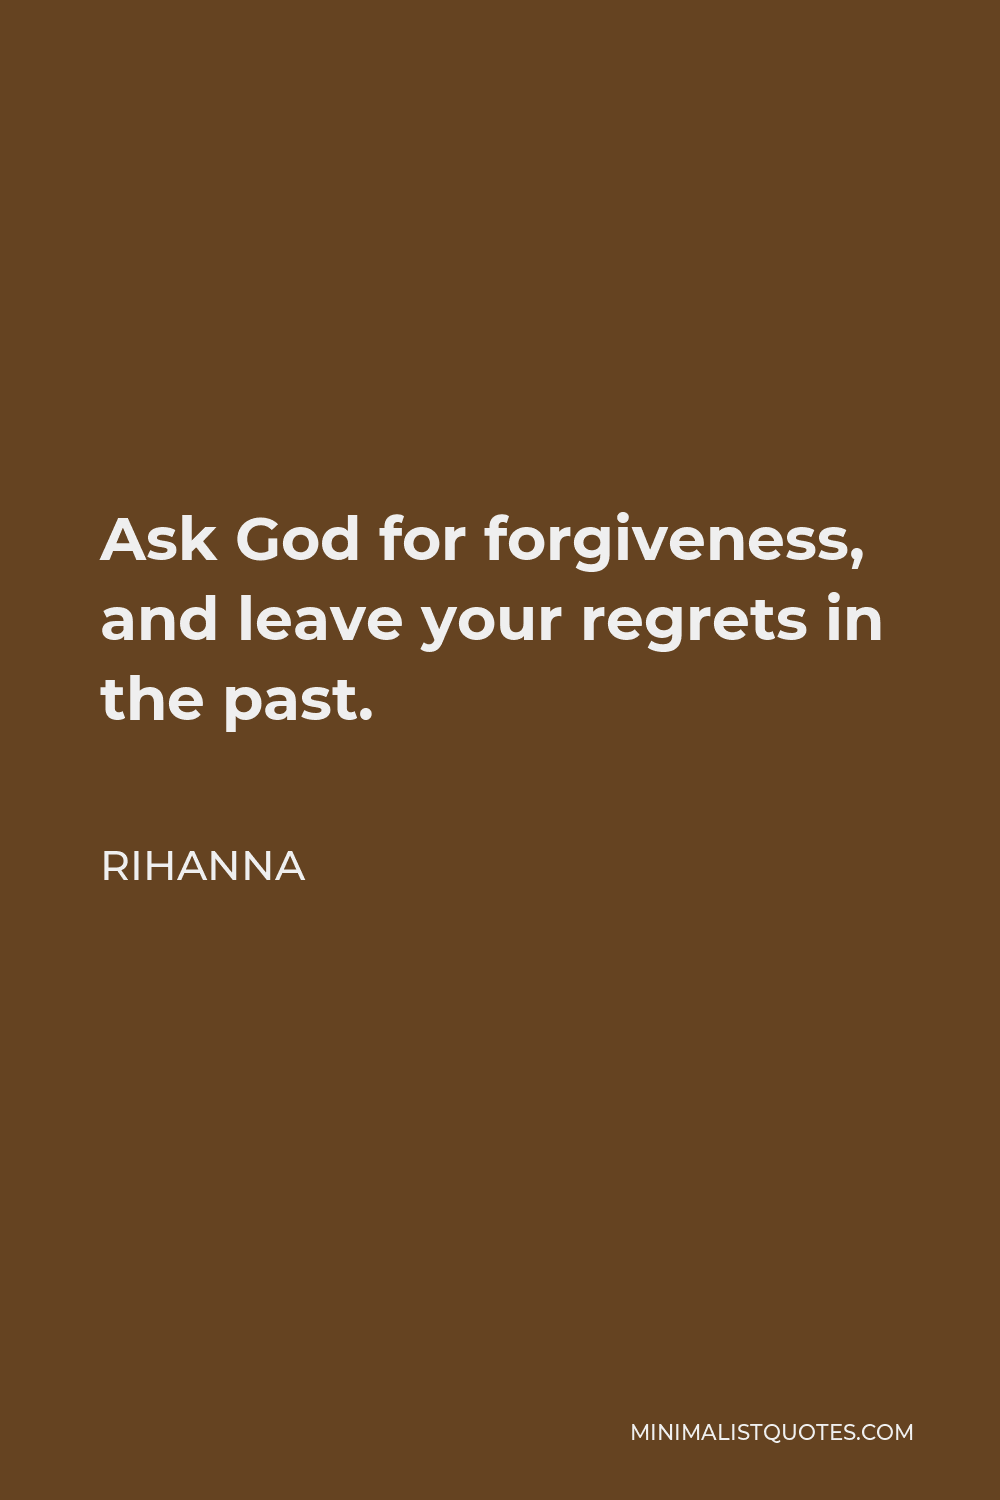 Rihanna Quote - Ask God for forgiveness, and leave your regrets in the past.